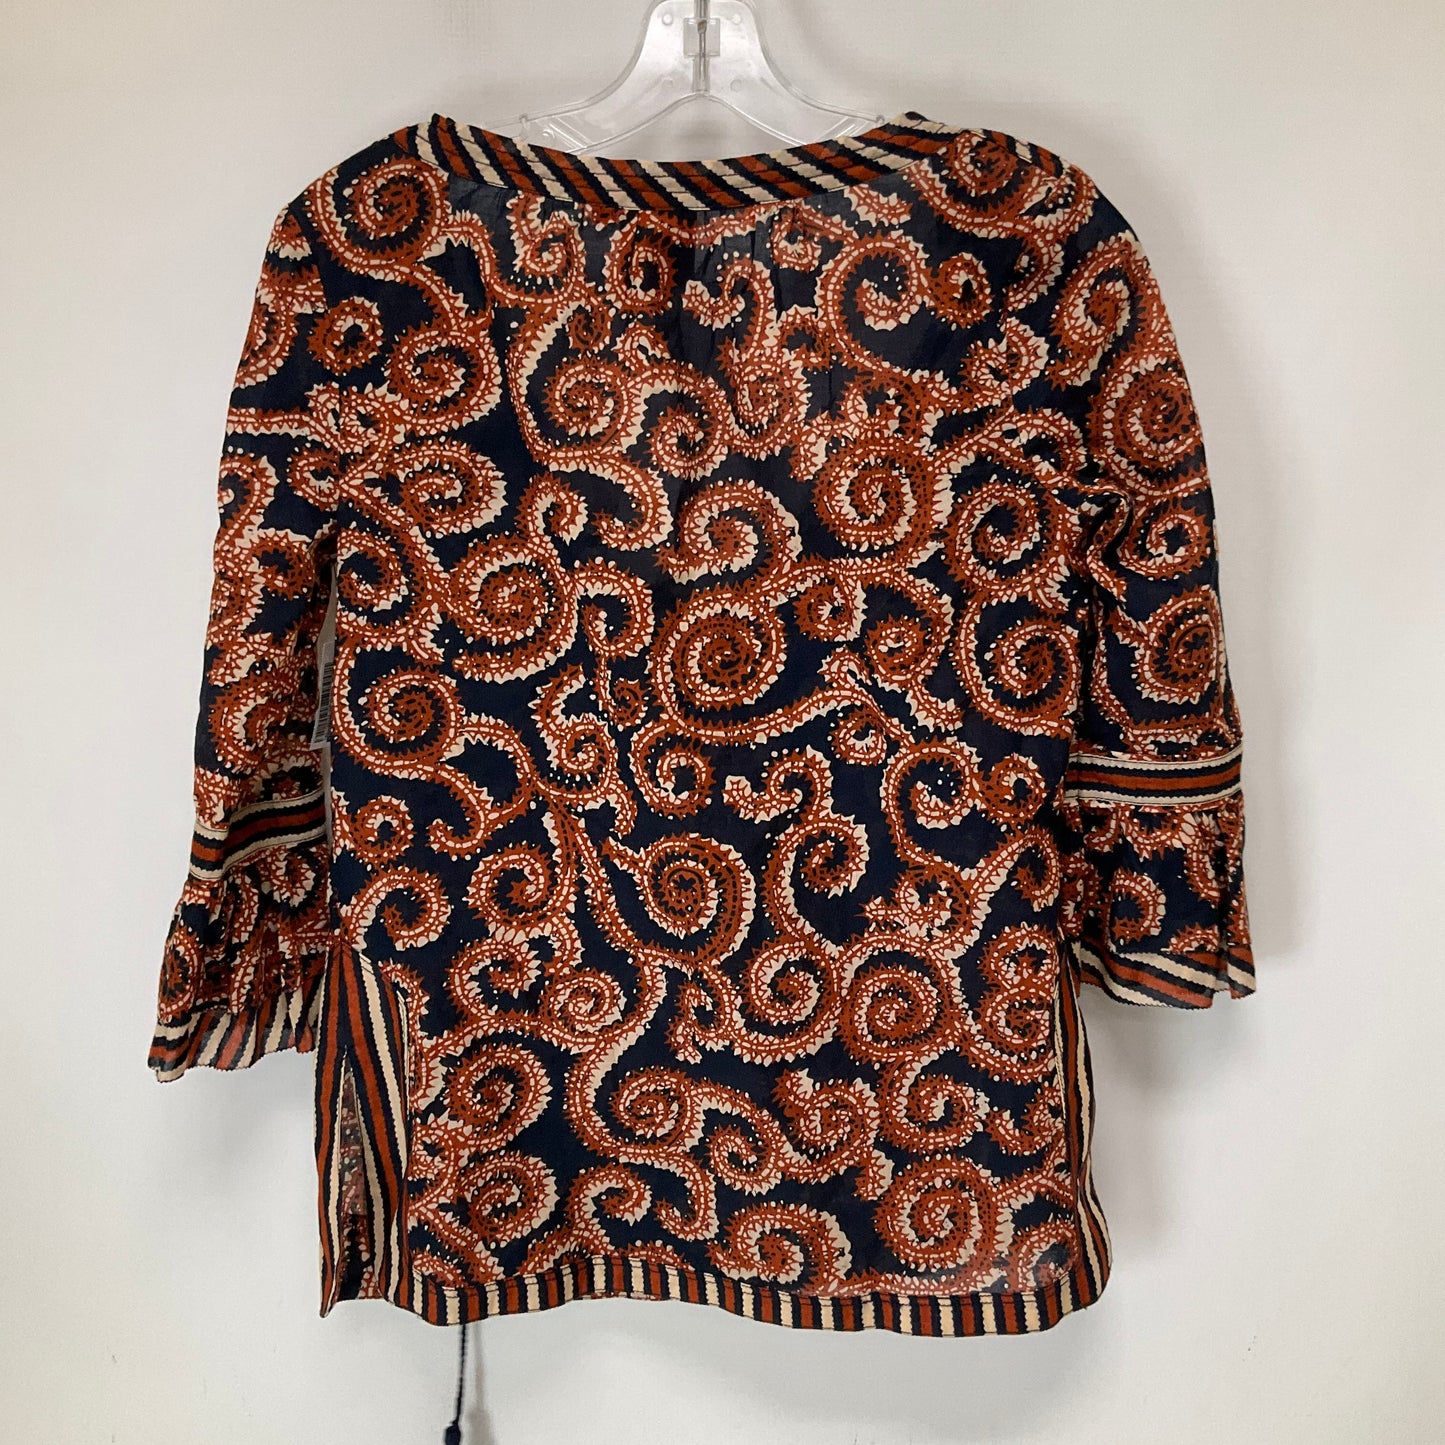 Multi-colored Top Long Sleeve Tory Burch, Size 0